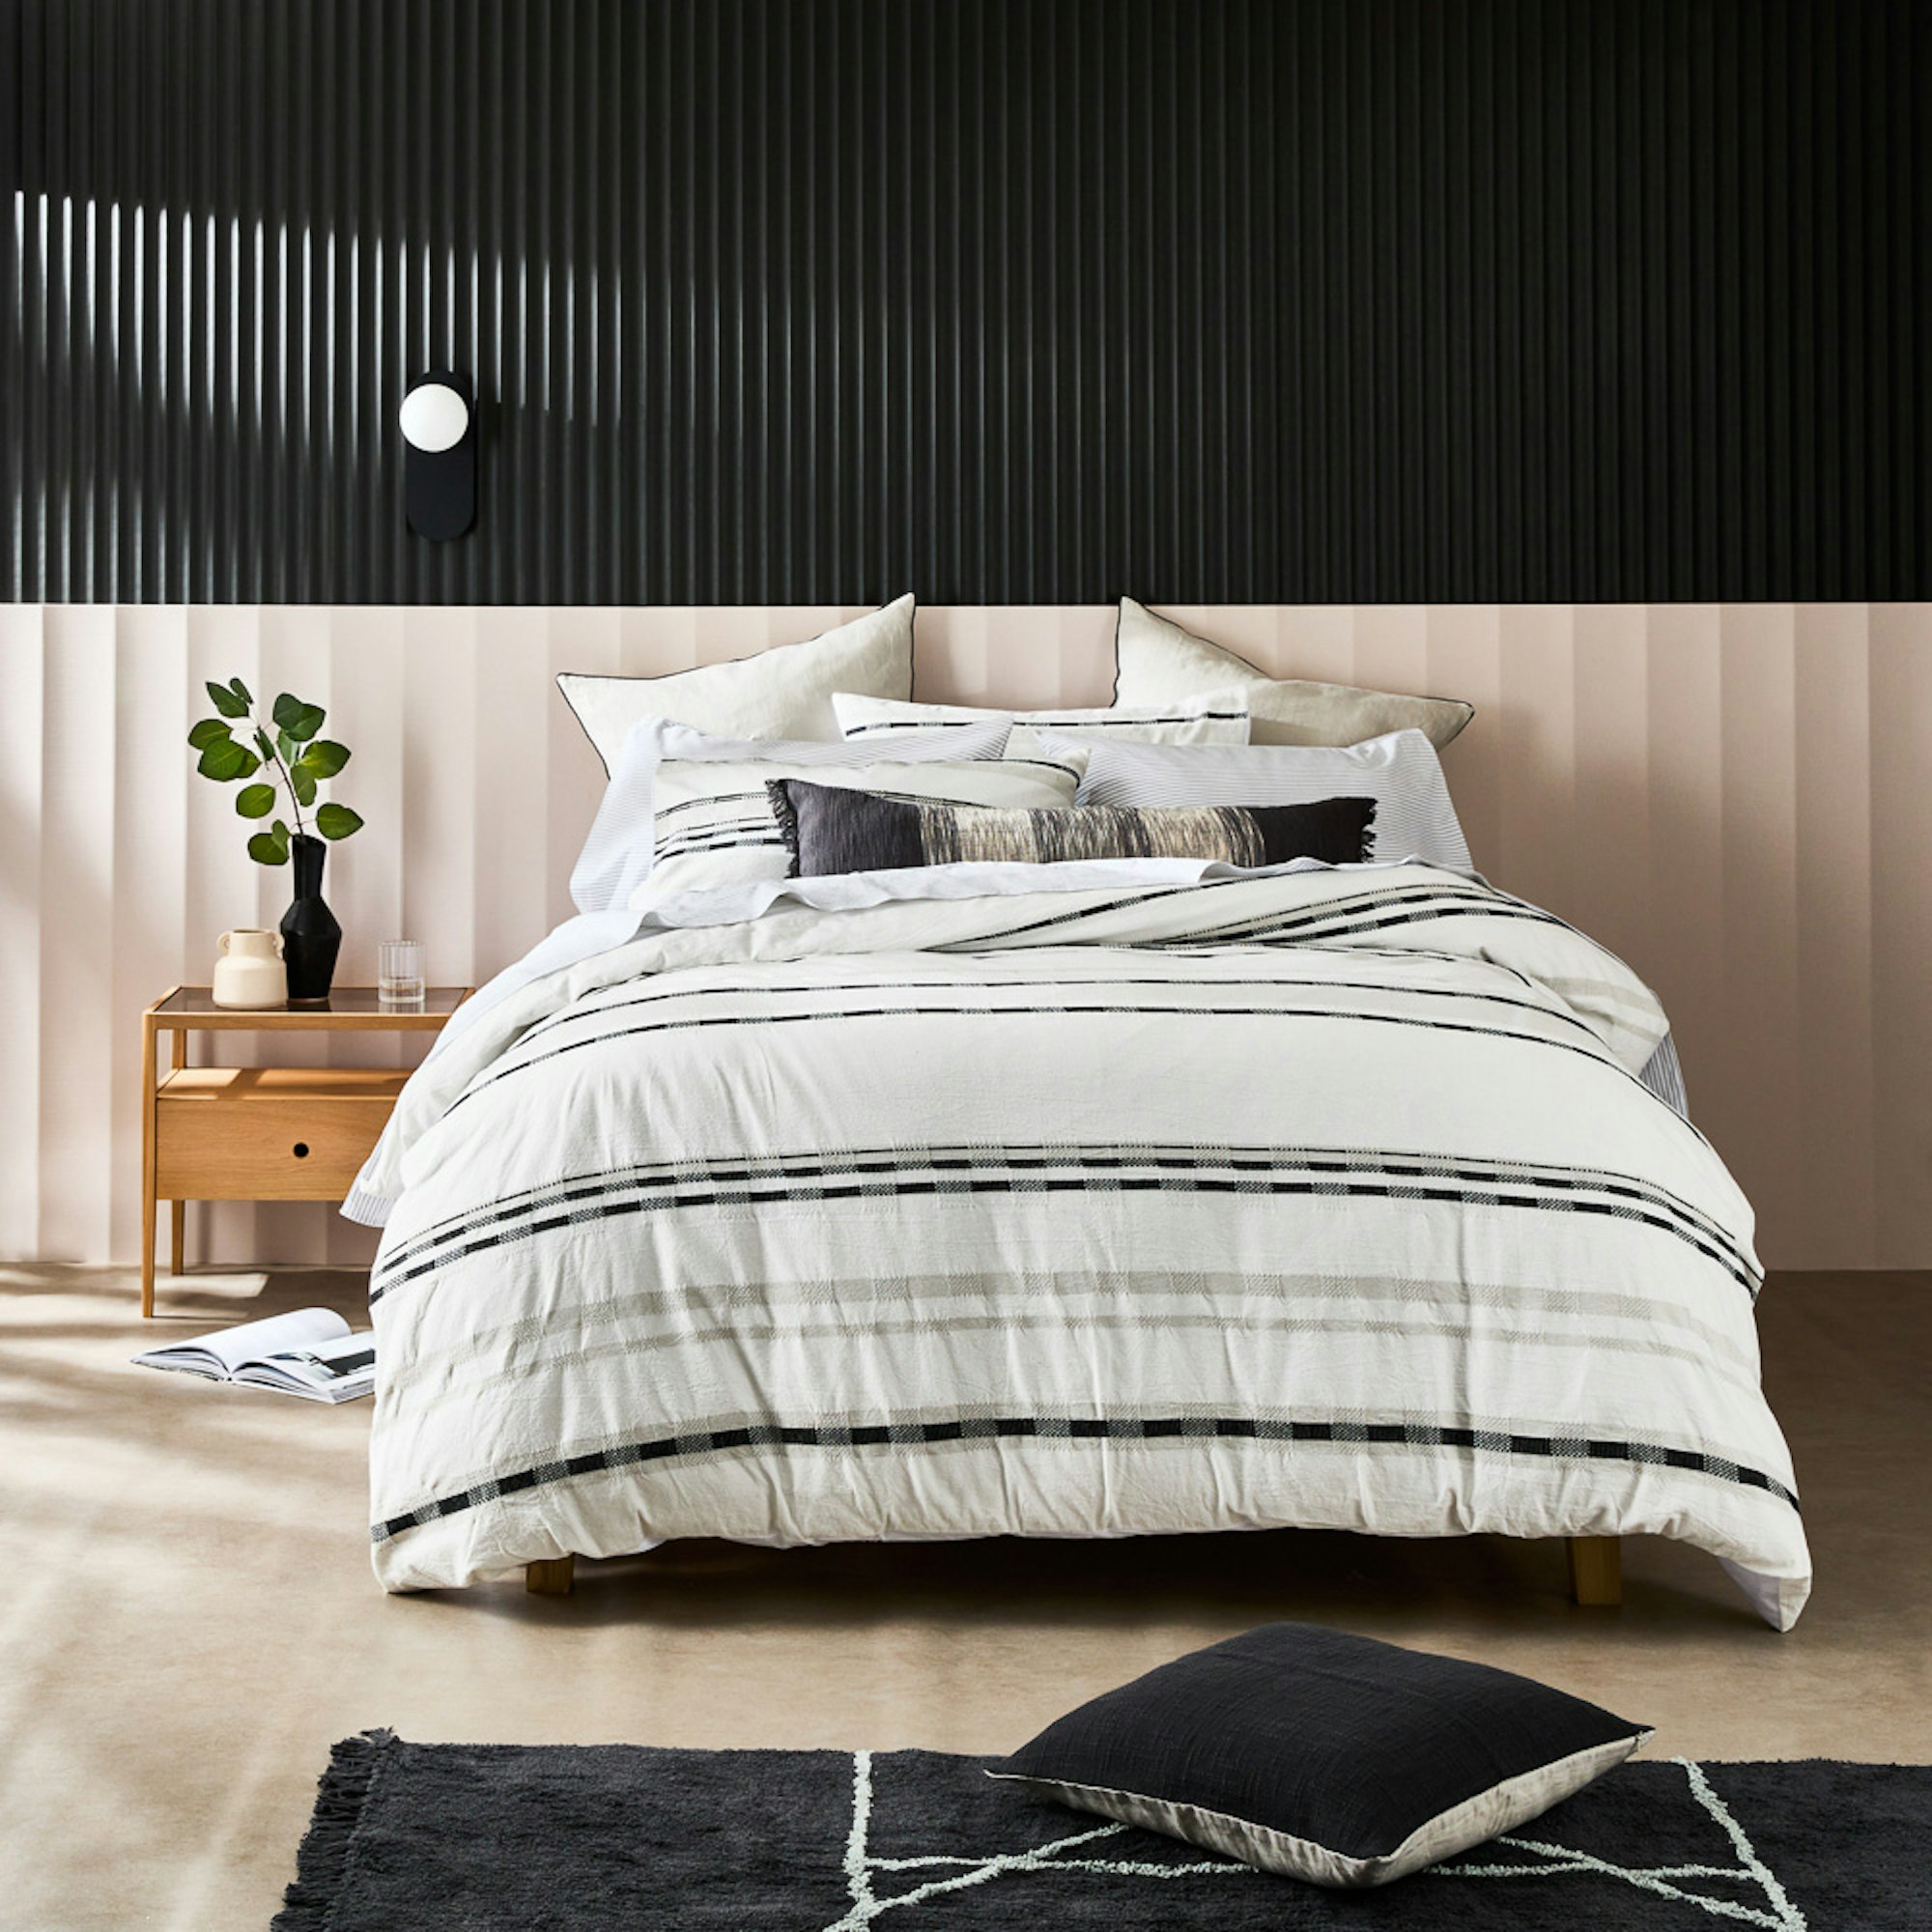 Neale Whitaker SS23 Yamba Quilt Cover set. Bed dressed in white with black and green stripes in a moody monochromatic room.